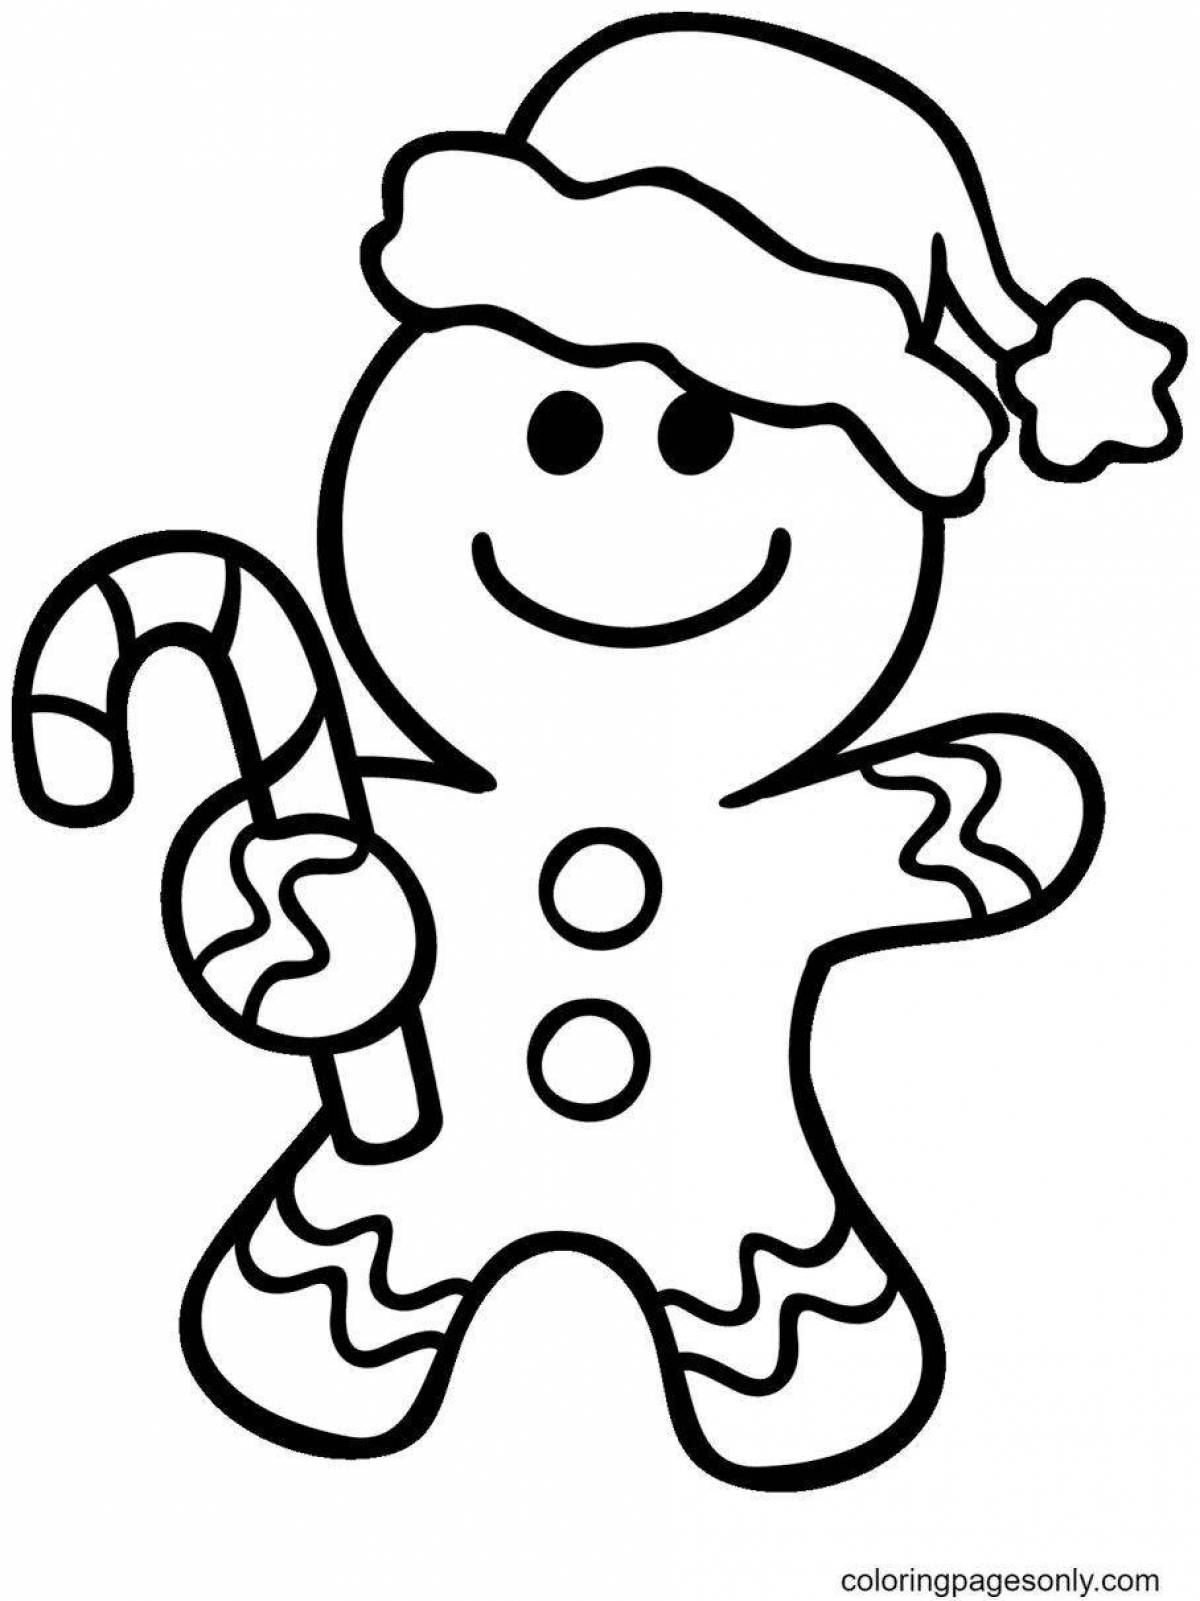 Gingerbread Live Coloring Page